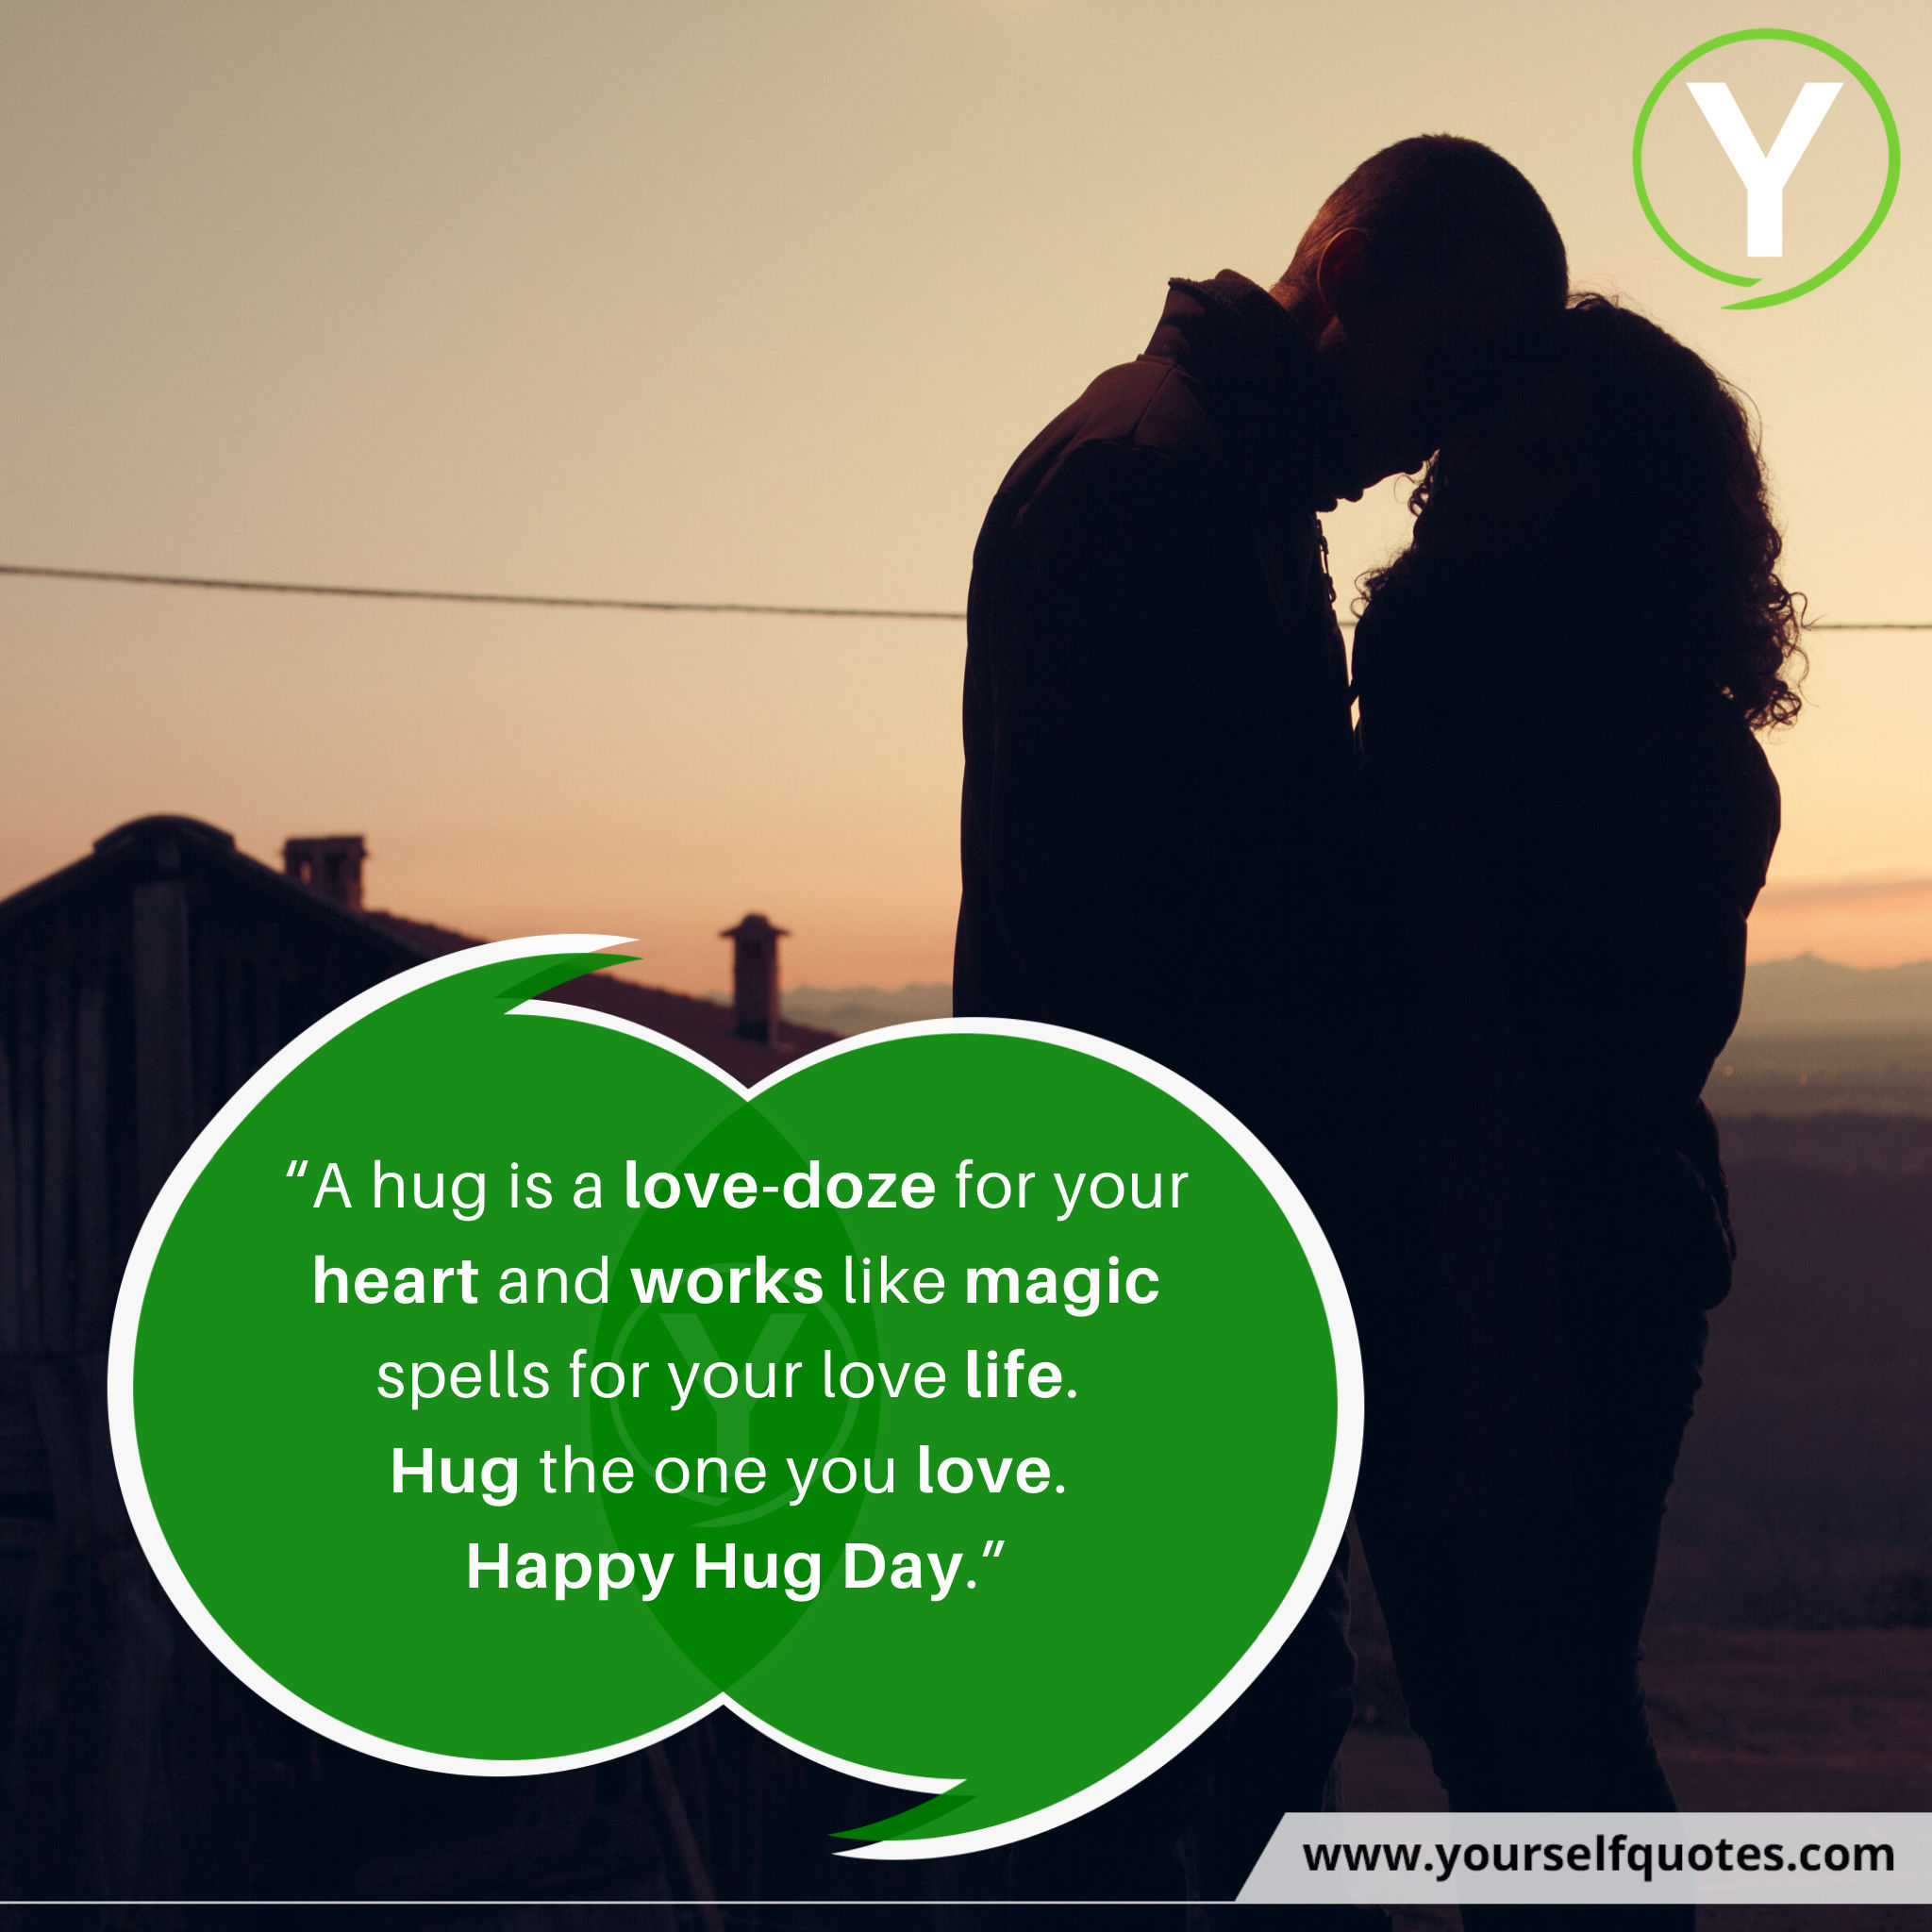 Happy Hug Day Quotes Images